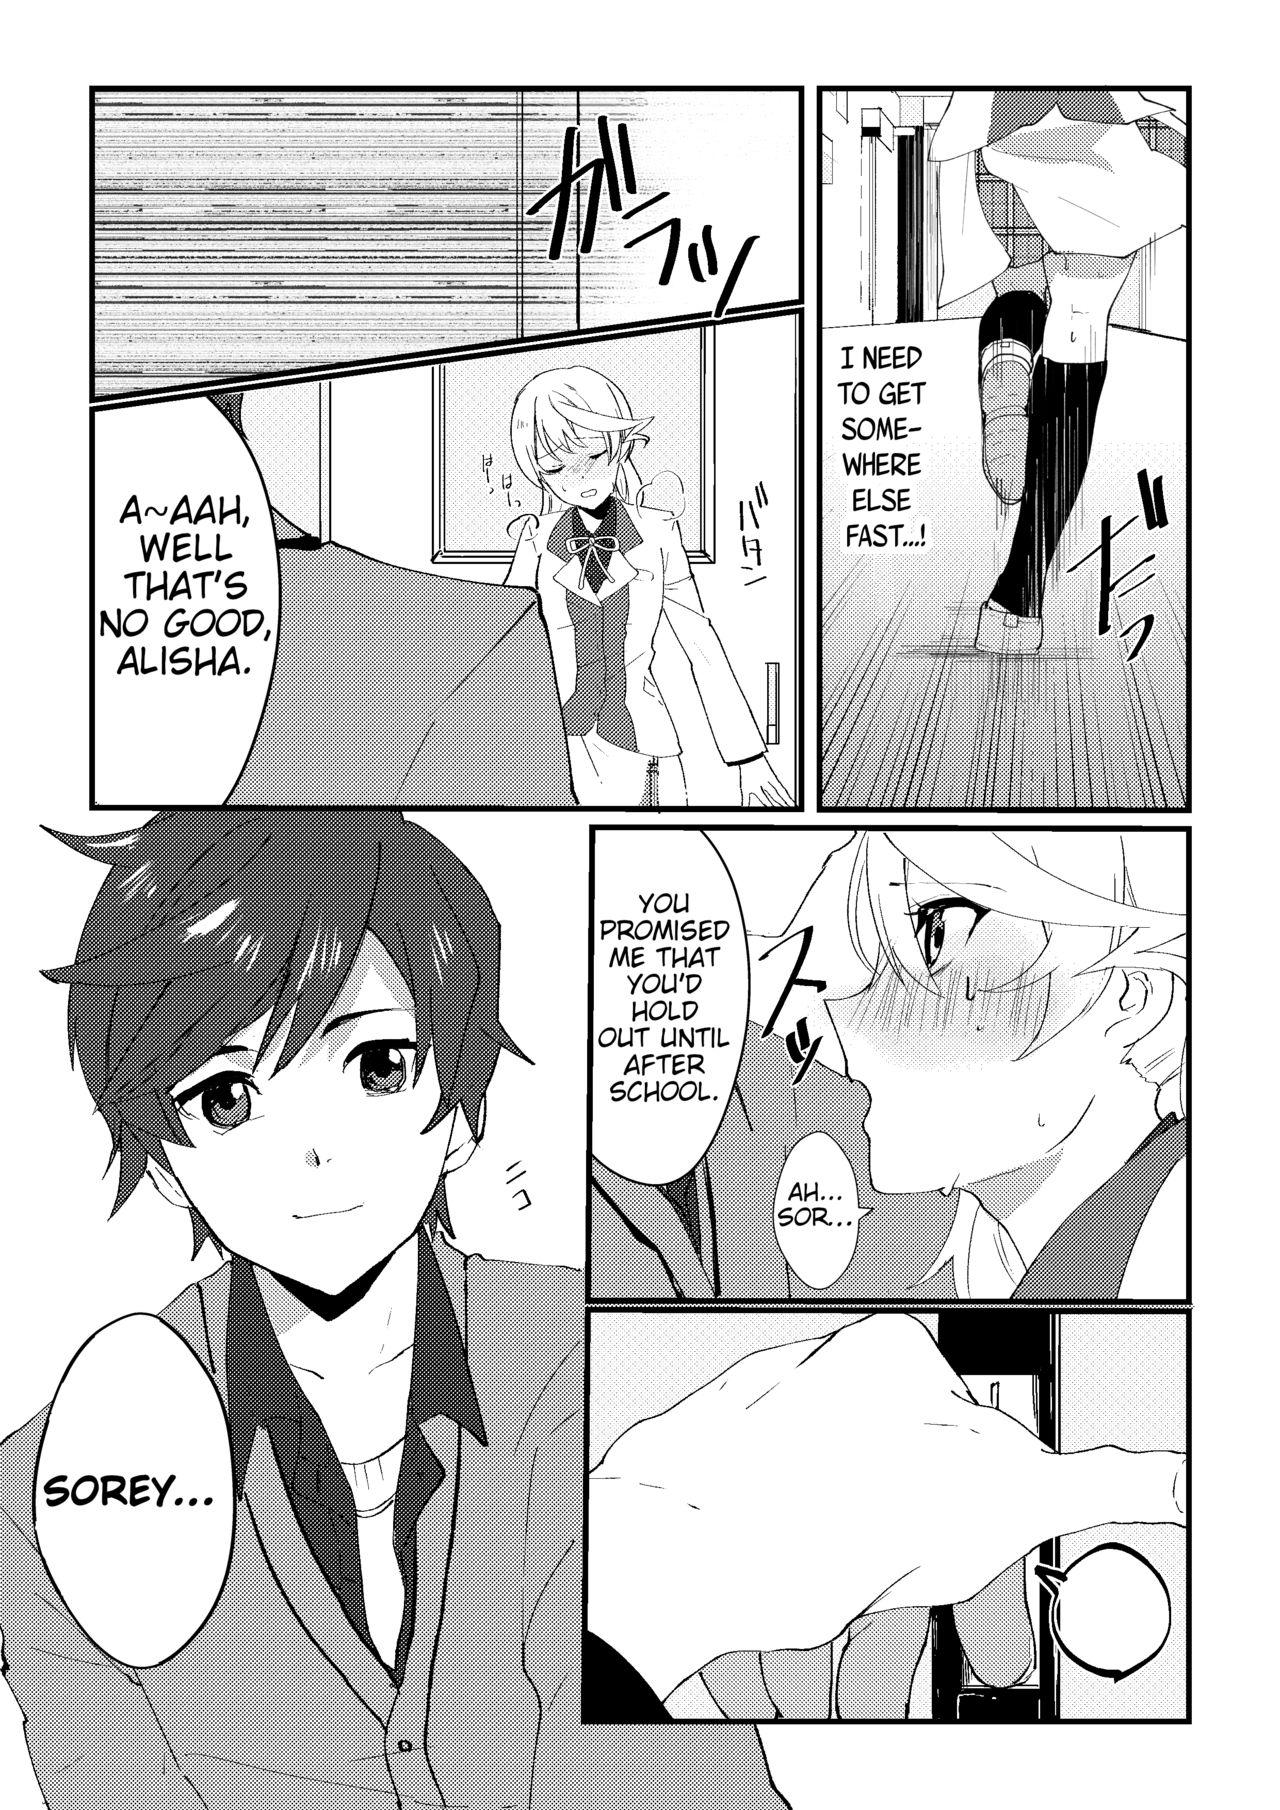 Softcore crazy about you - Tales of zestiria Arabe - Page 4